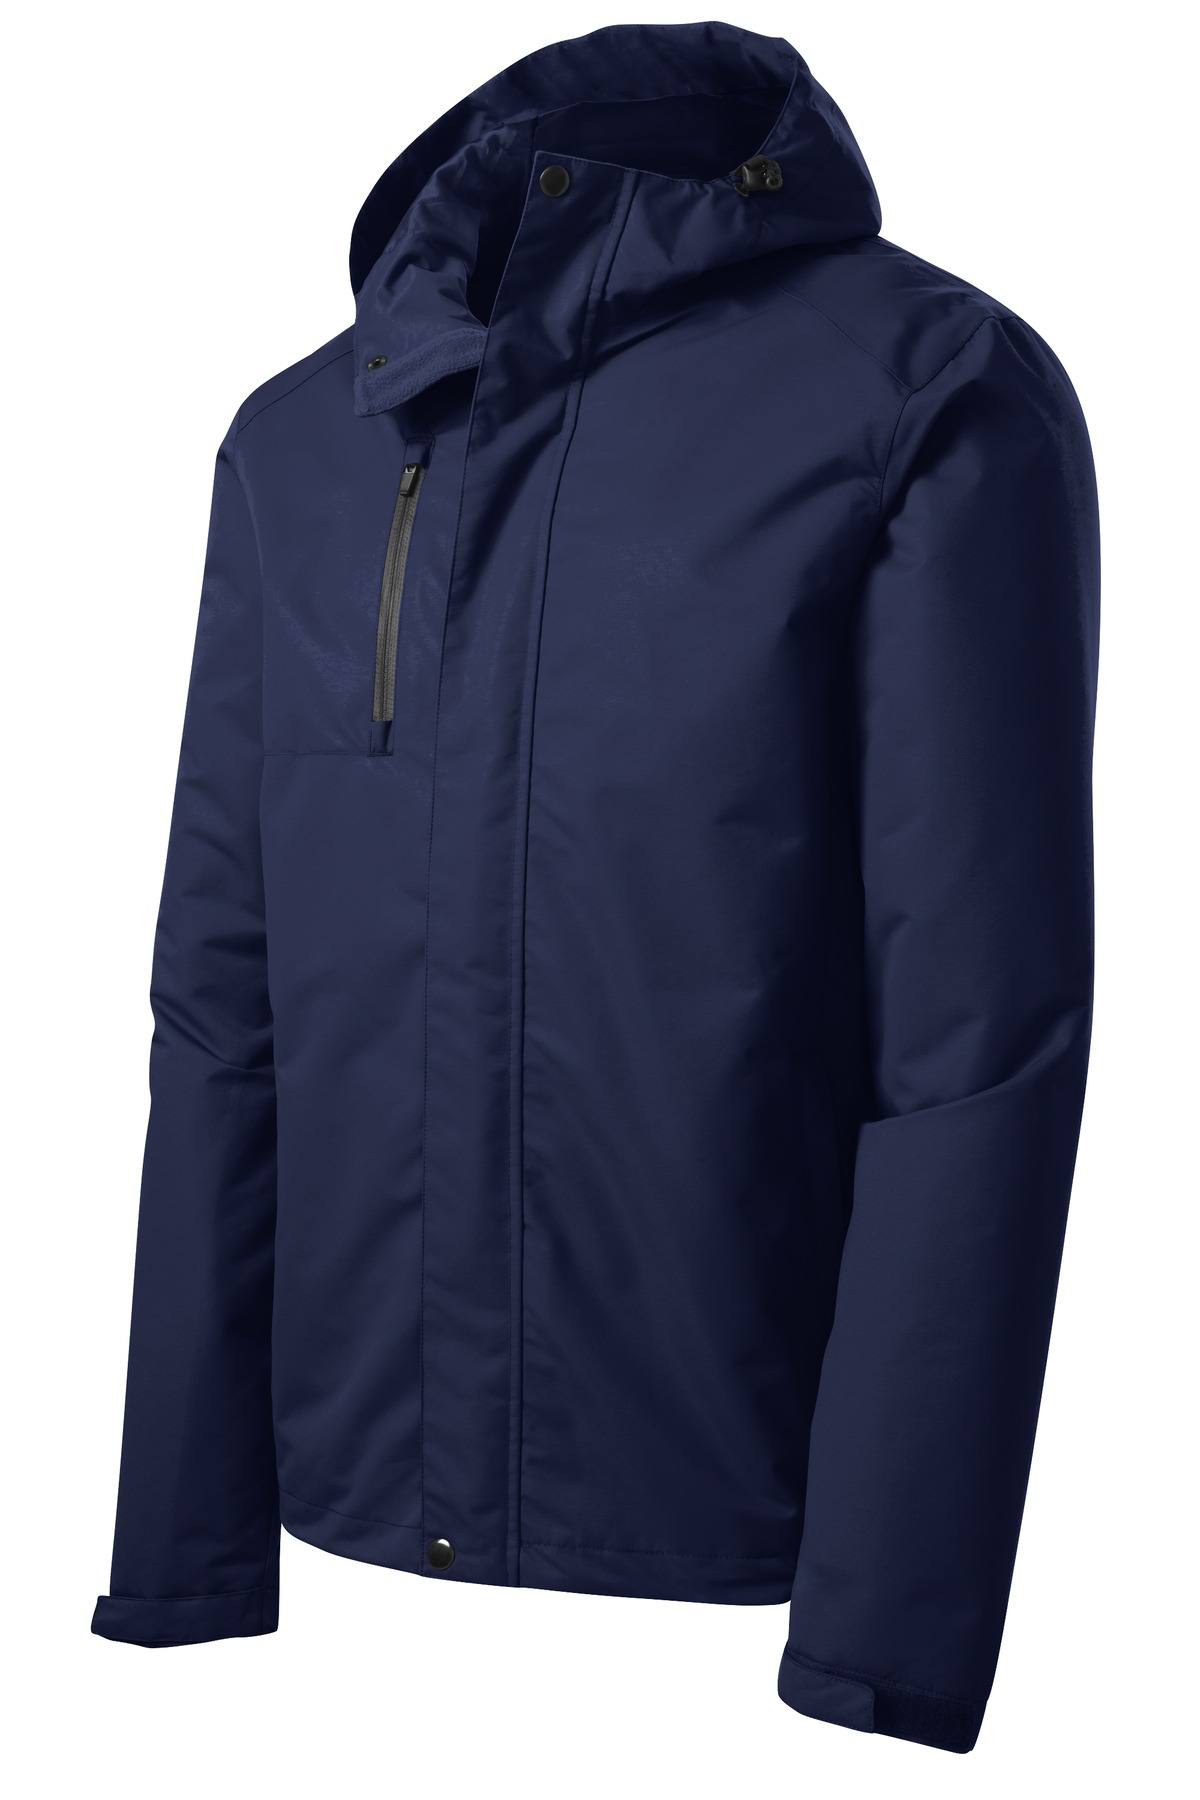 Port Authority All Conditions Jacket-M (True Navy) - image 5 of 6